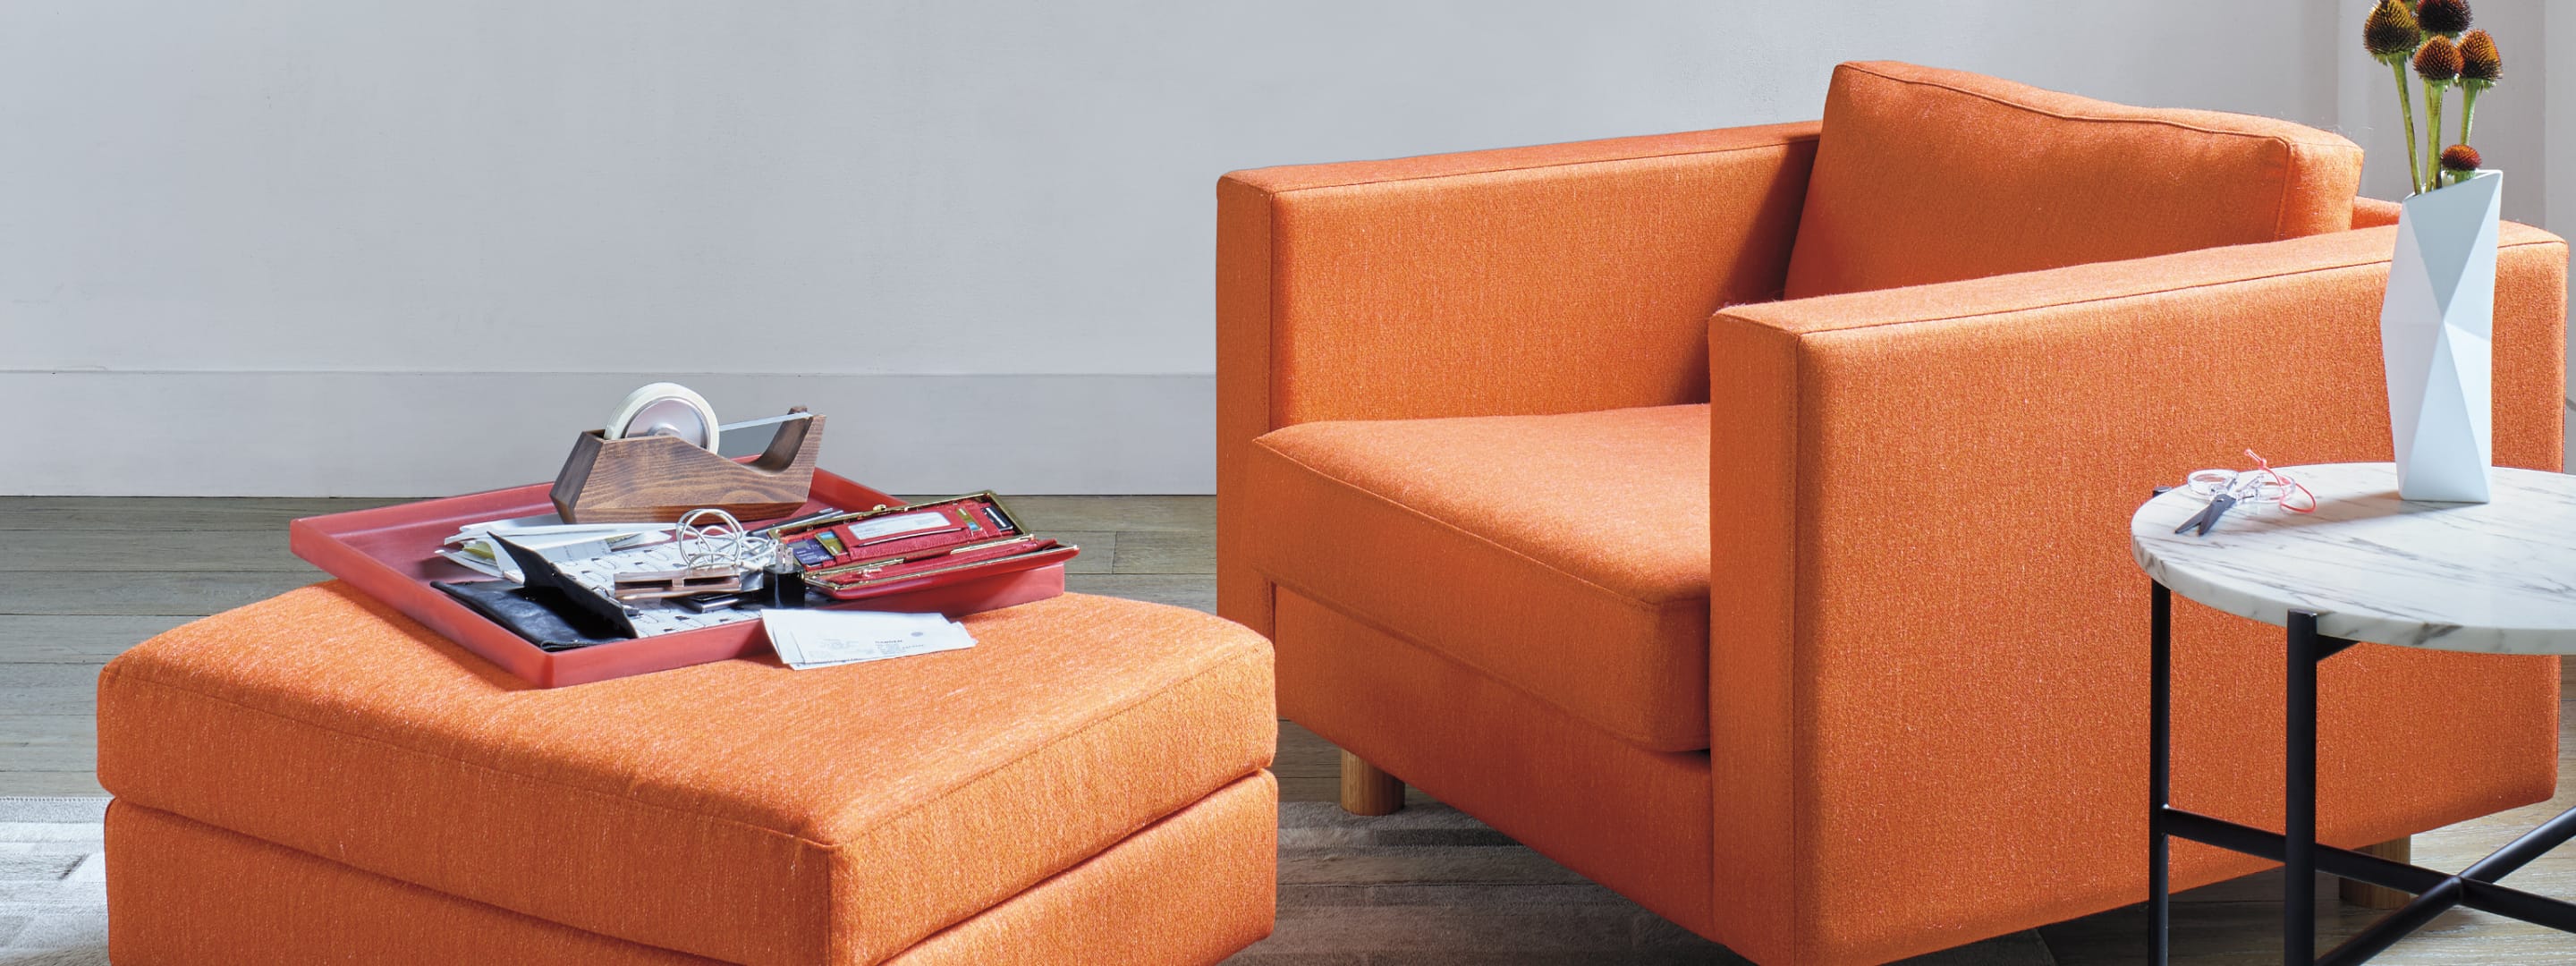 A colourful Lispenard lounge chair and ottoman in a living room.